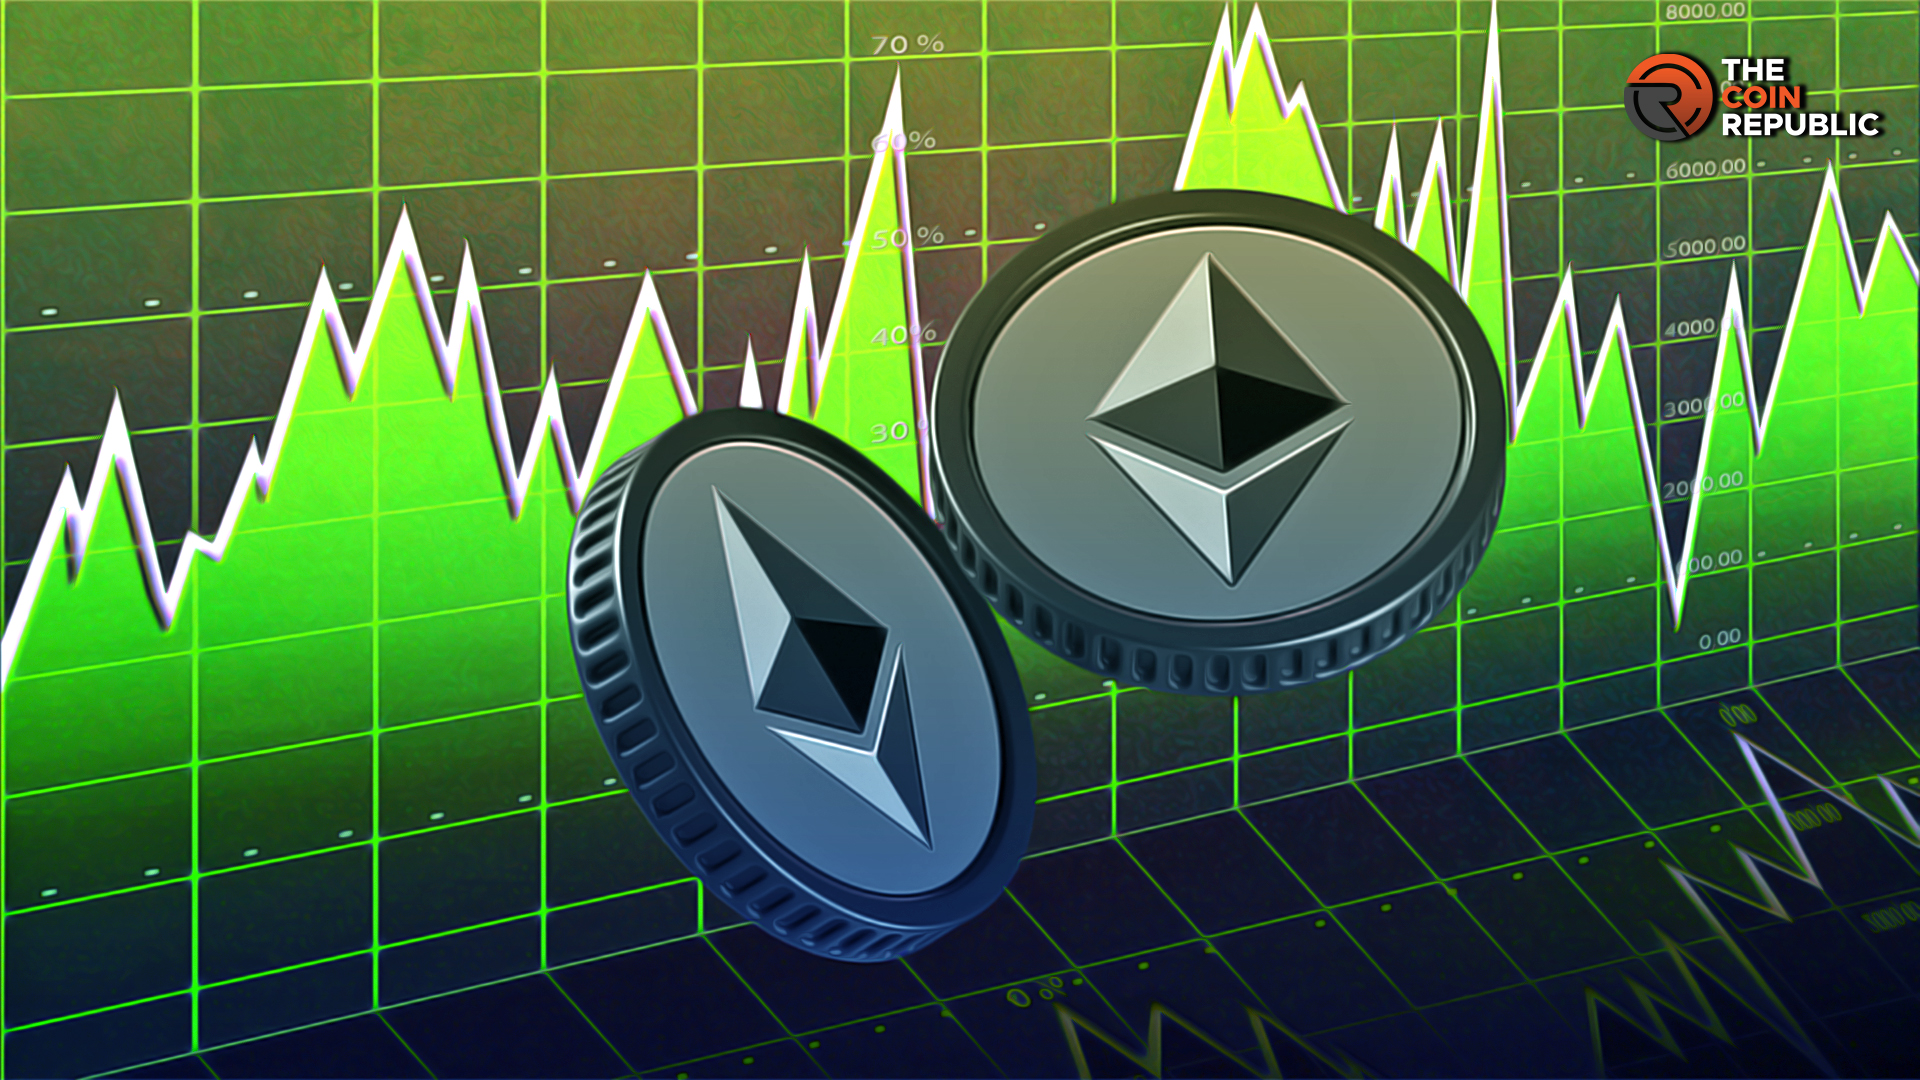 Ethereum Price Has Approached $3000 Mark; Will It Sustain or Not?